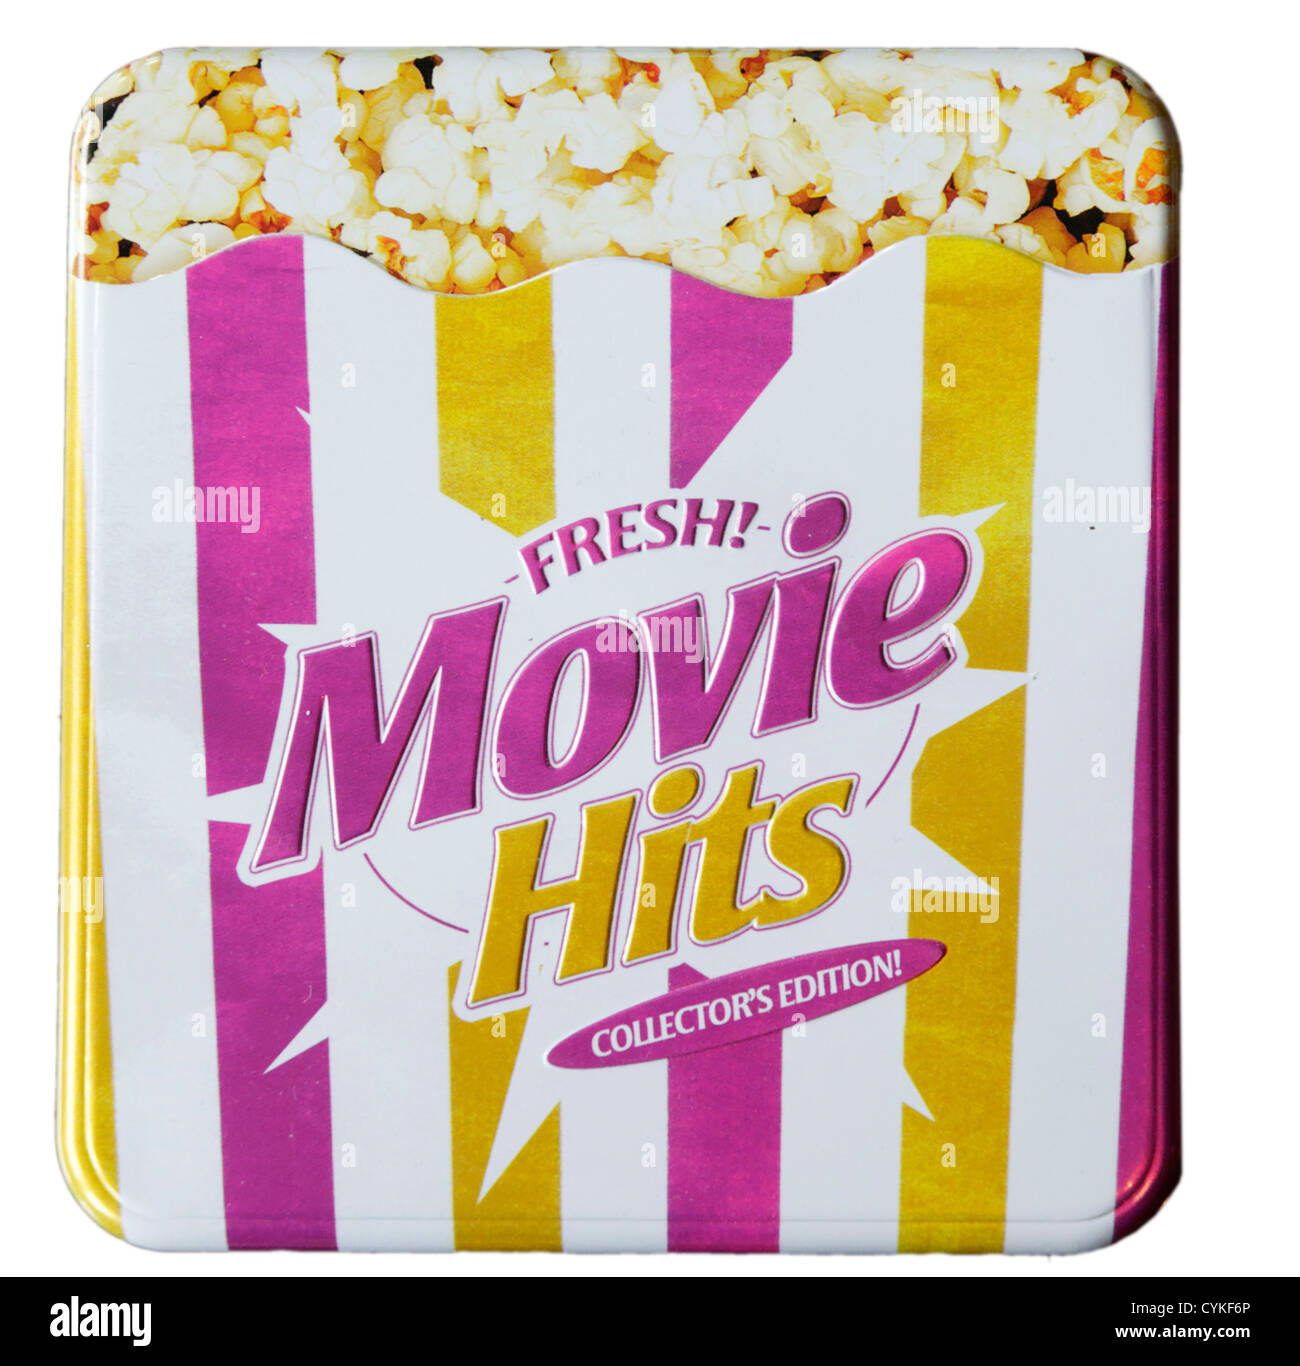 A CD compilation of movie music shaped like a bag of popcorn Stock Photo